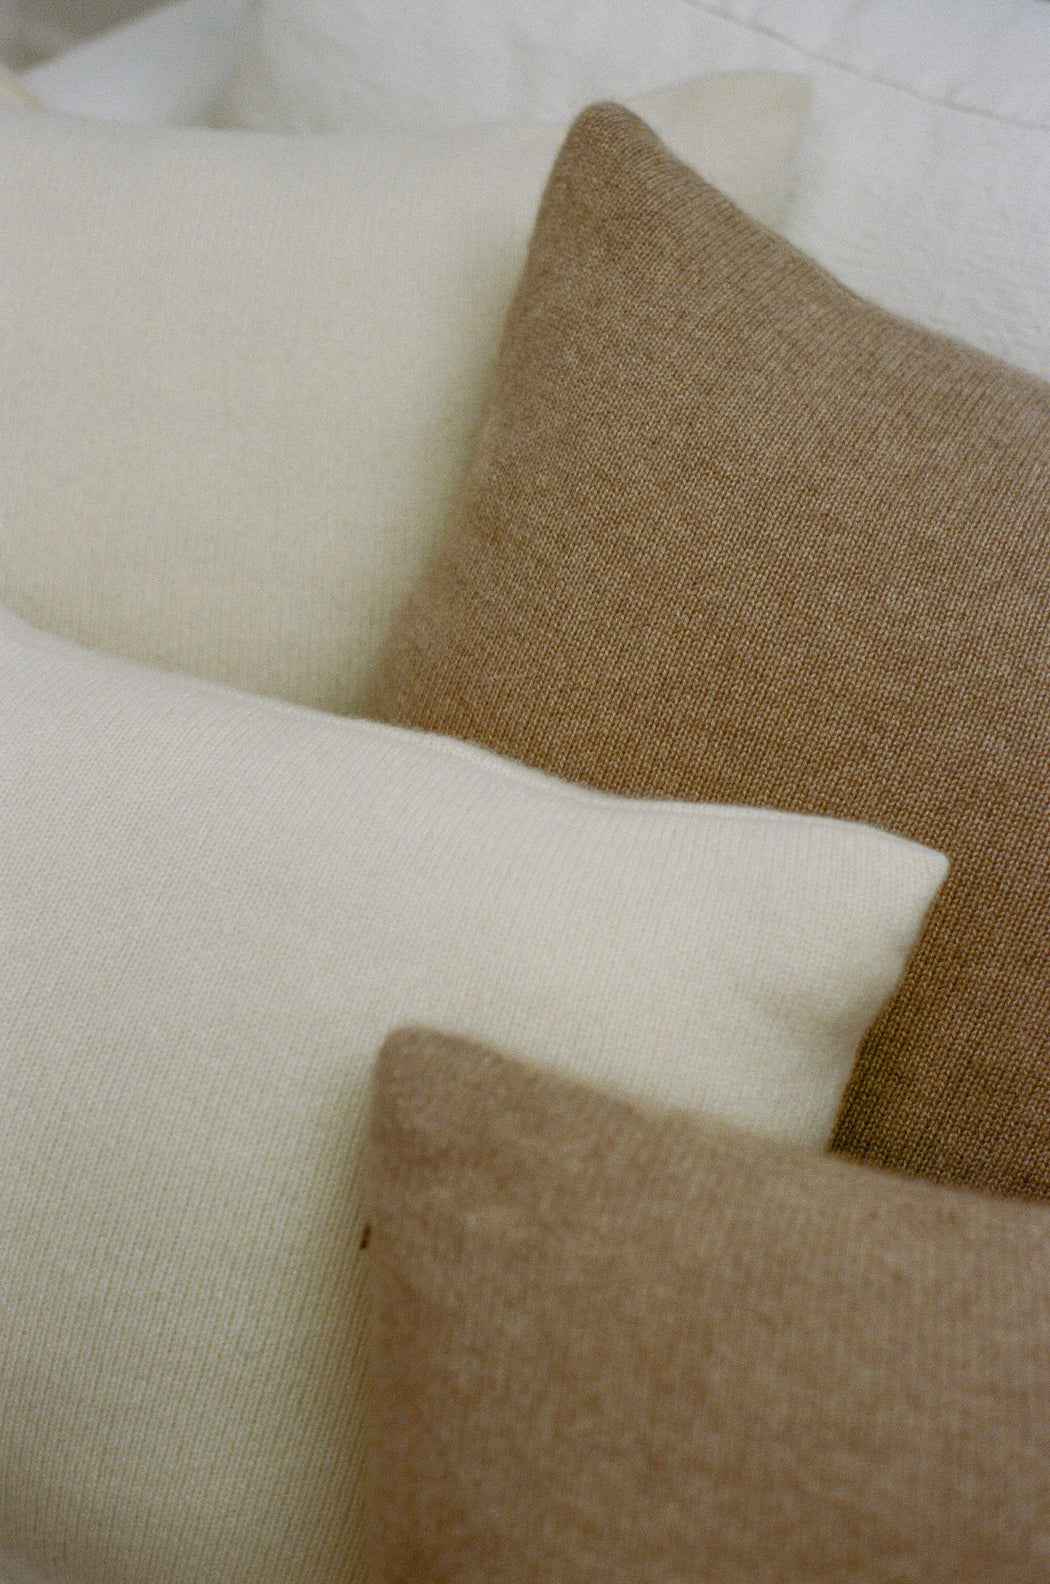 Bespoke 20" Italian Cashmere Jersey Knit Down Pillow - Custom Colors Made to Order (8-Week Lead Time)